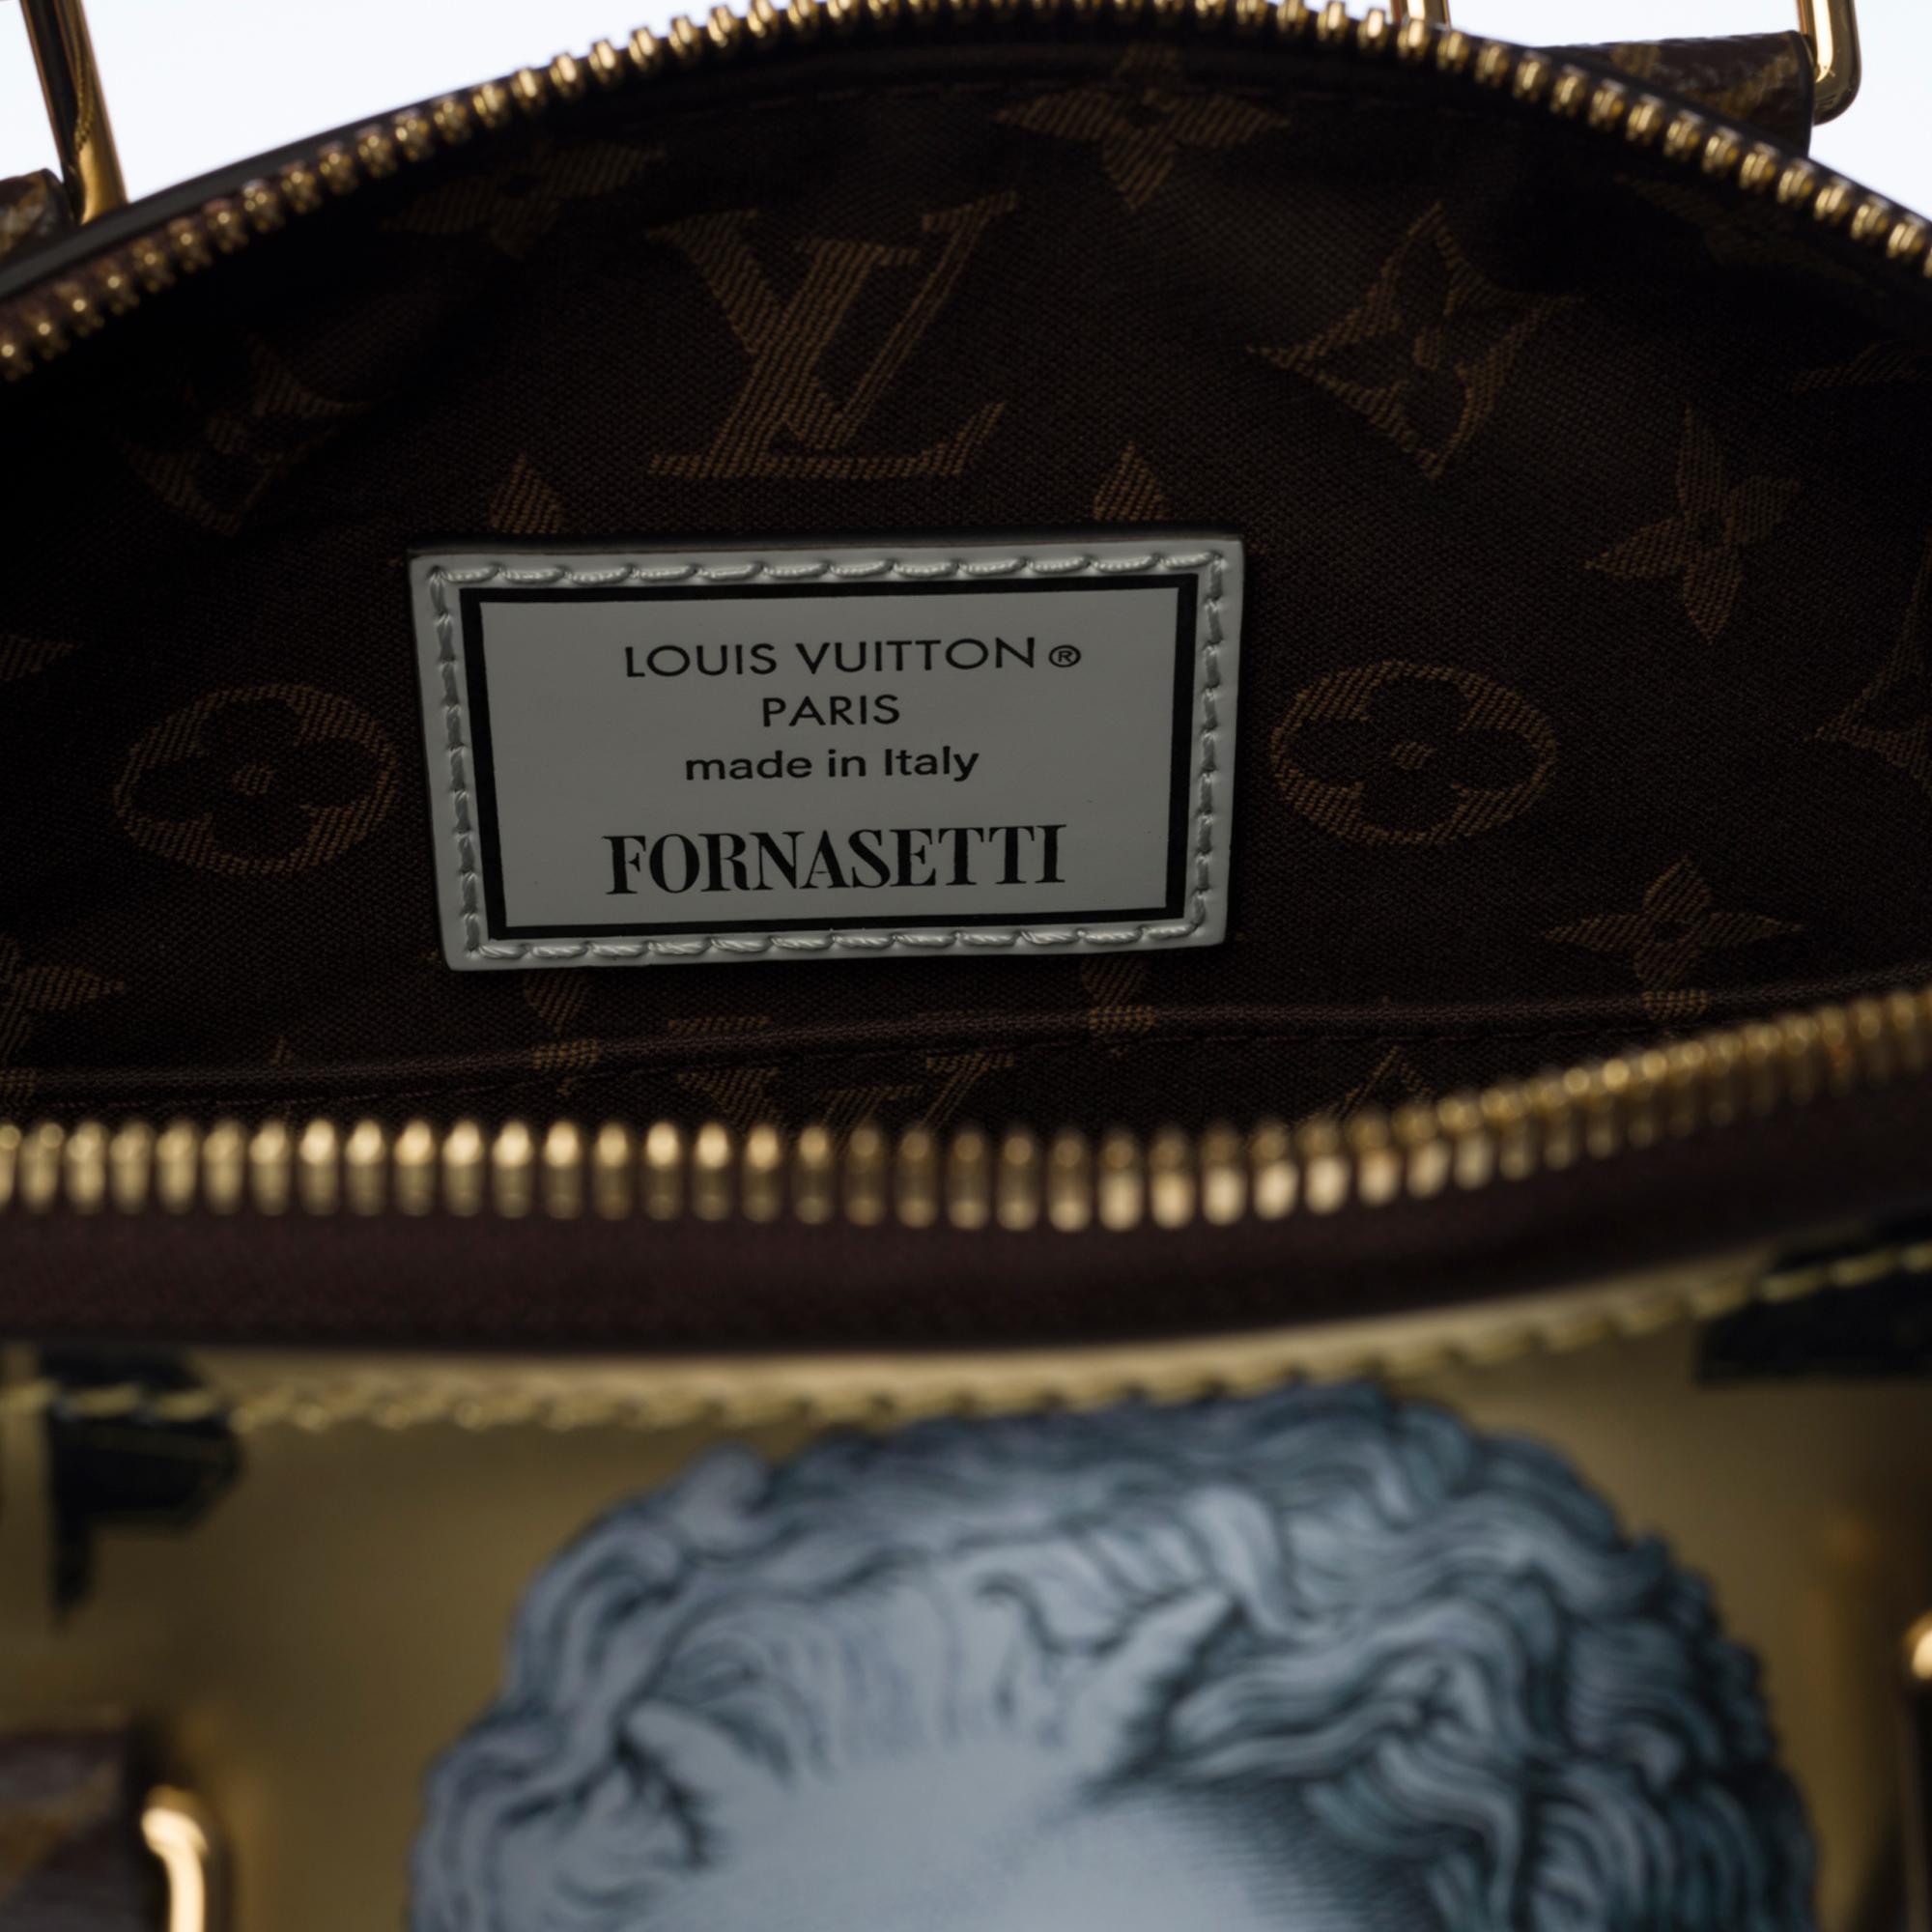 BRAND NEW-Limited edition Louis Vuitton Speedy 25 strap Fornasetti  fw21 2